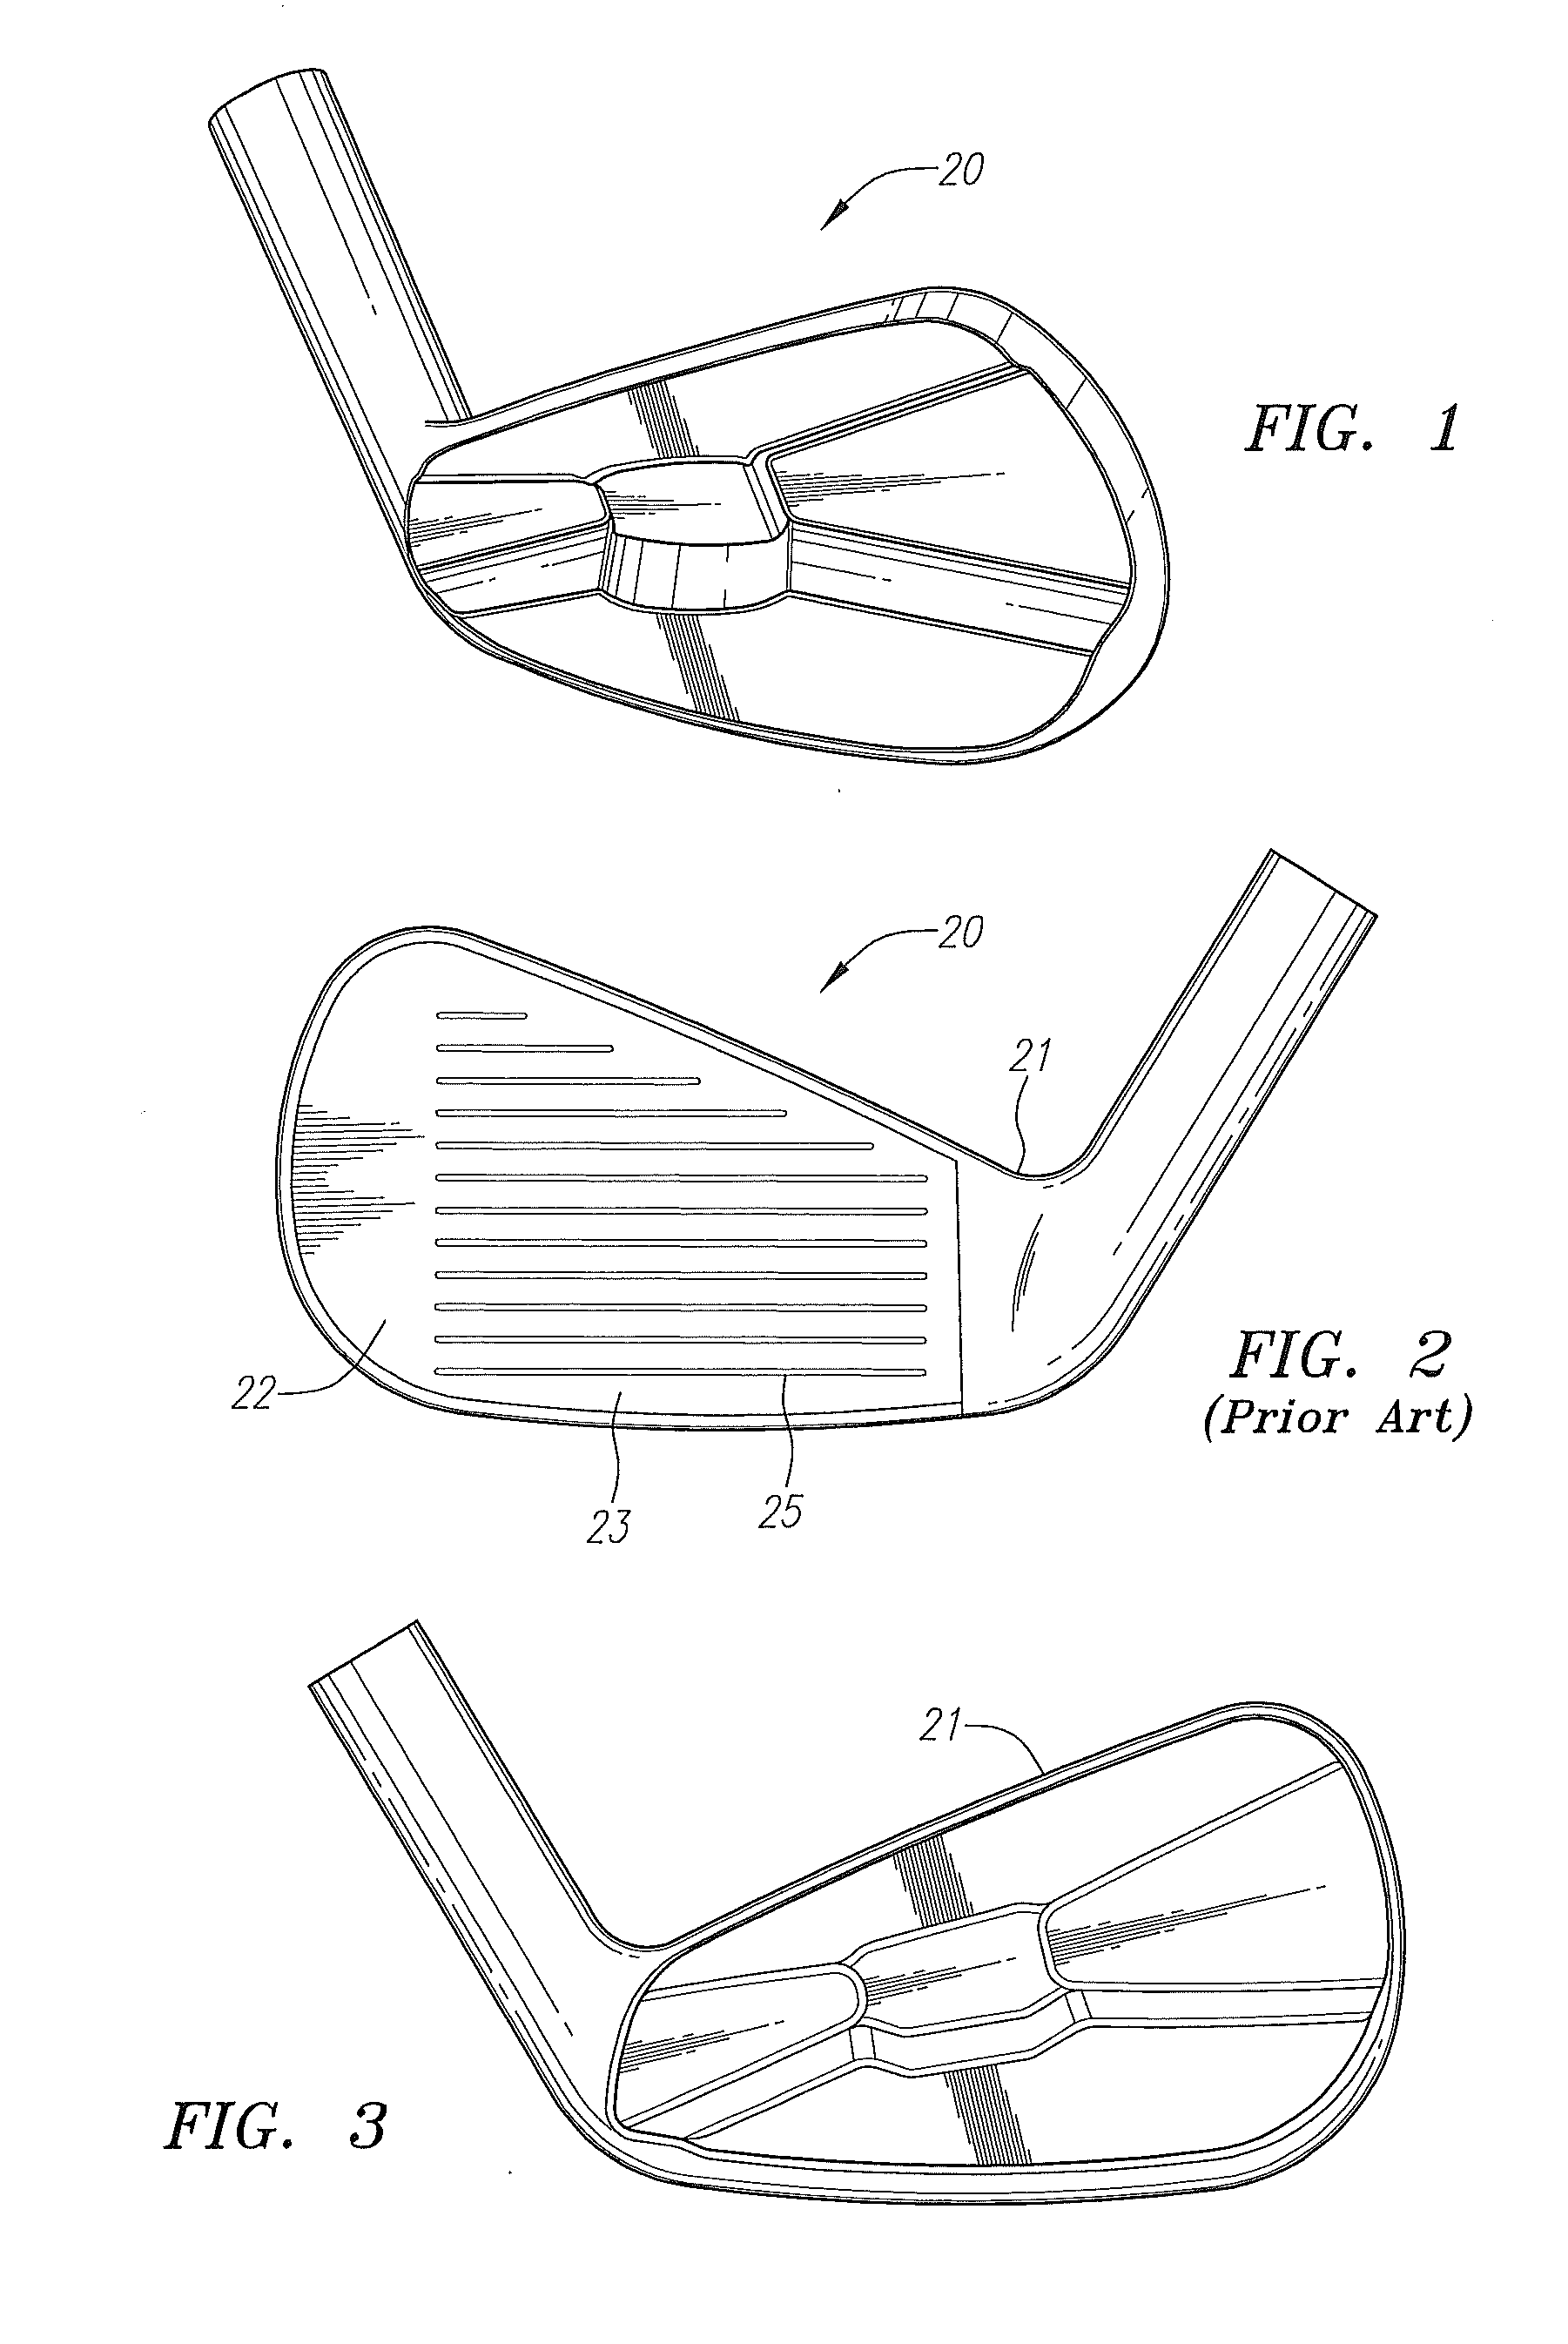 Iron-type golf club head with reduced face area below the scorelines